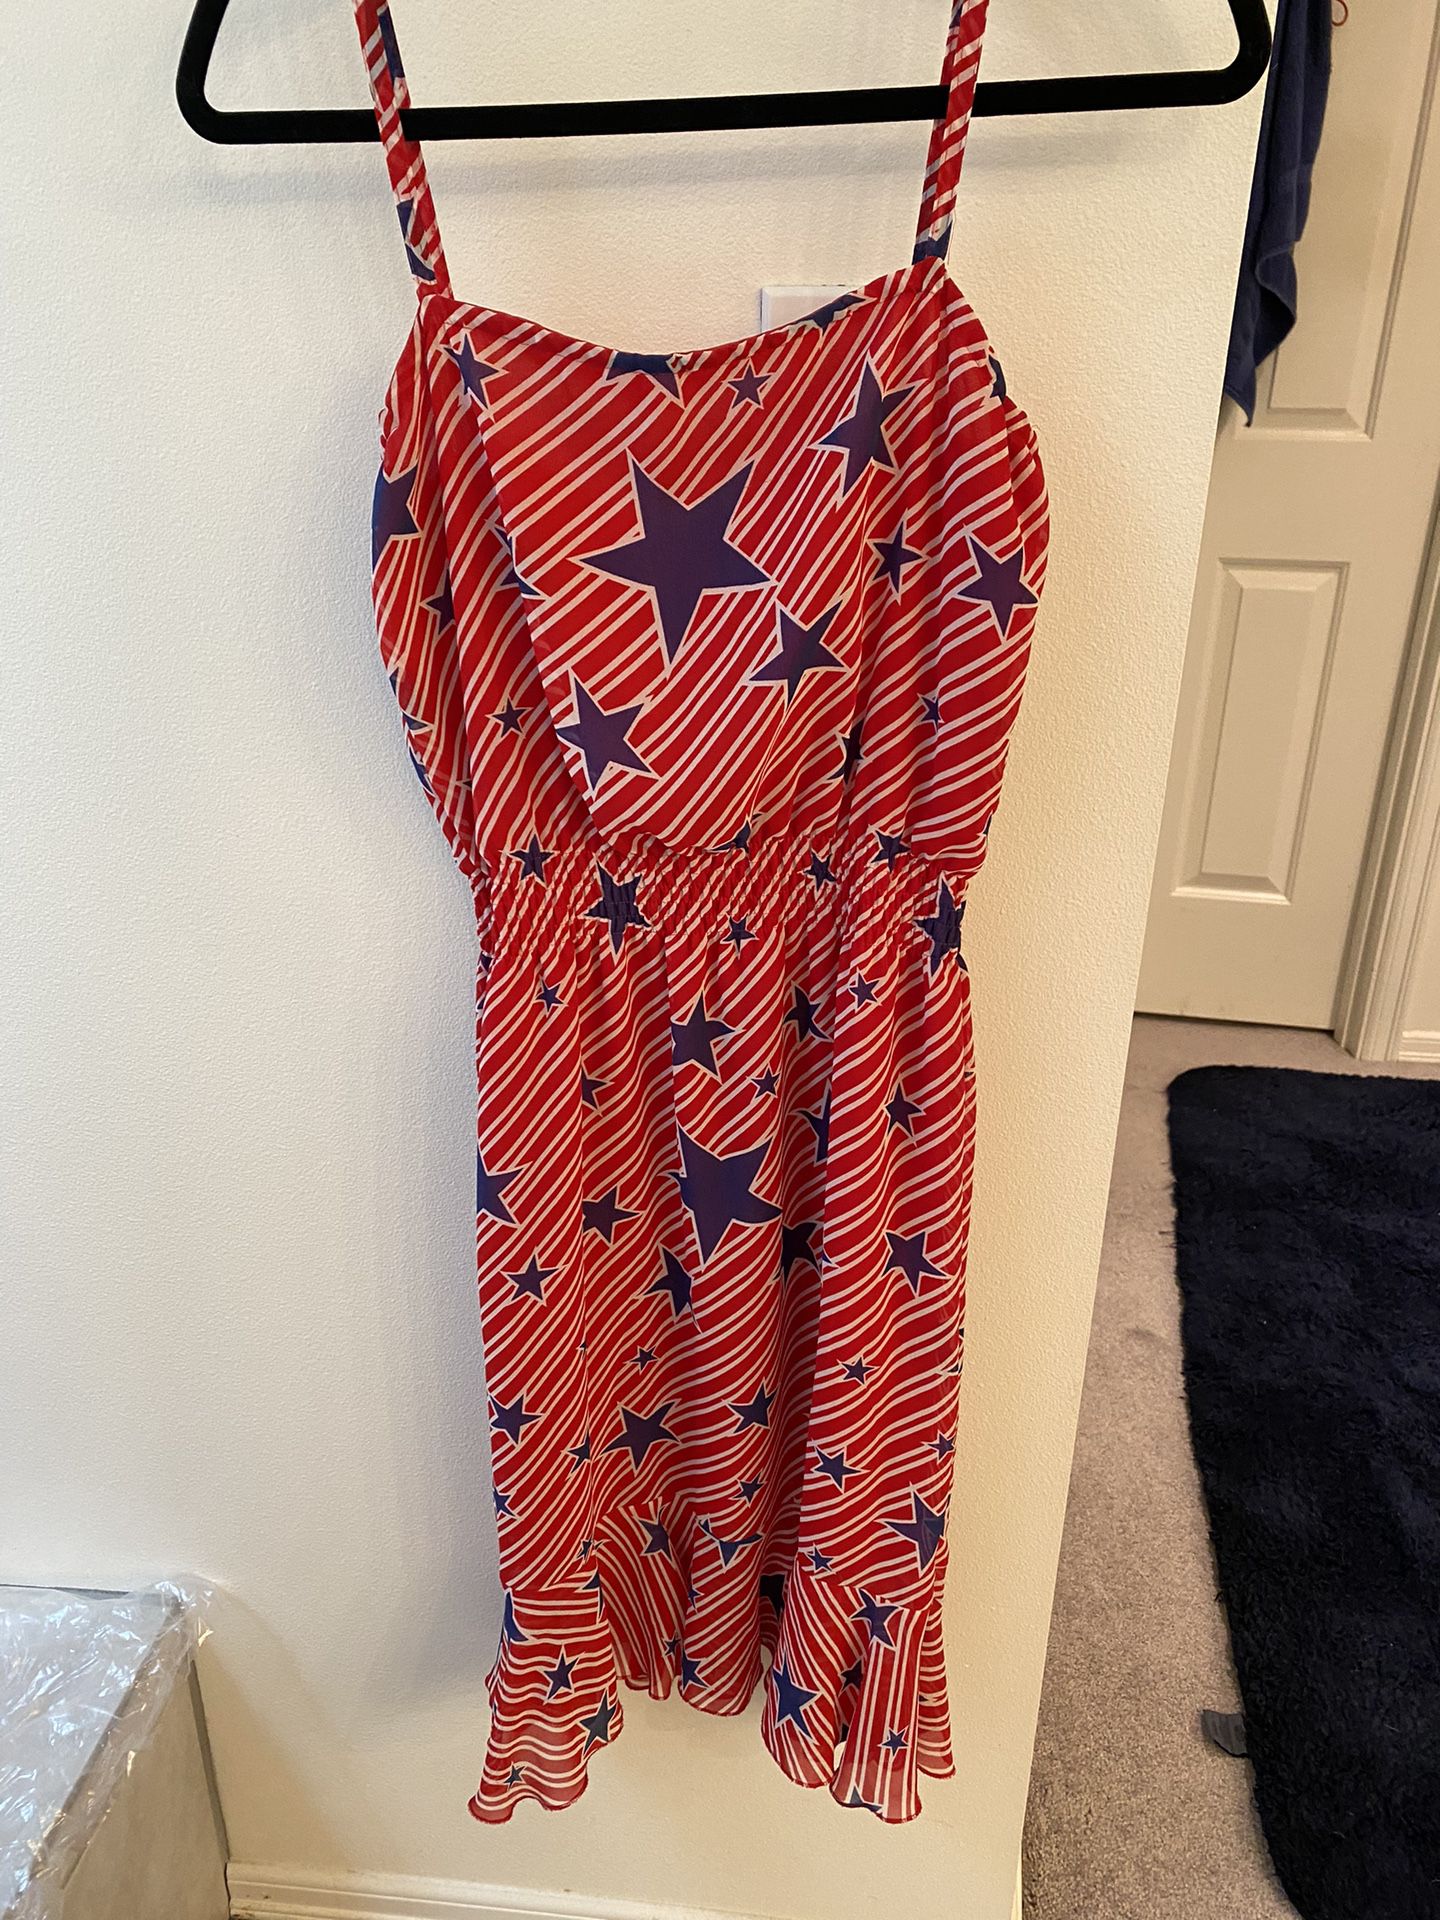 Red and white stripes Blue star dress Sz：S